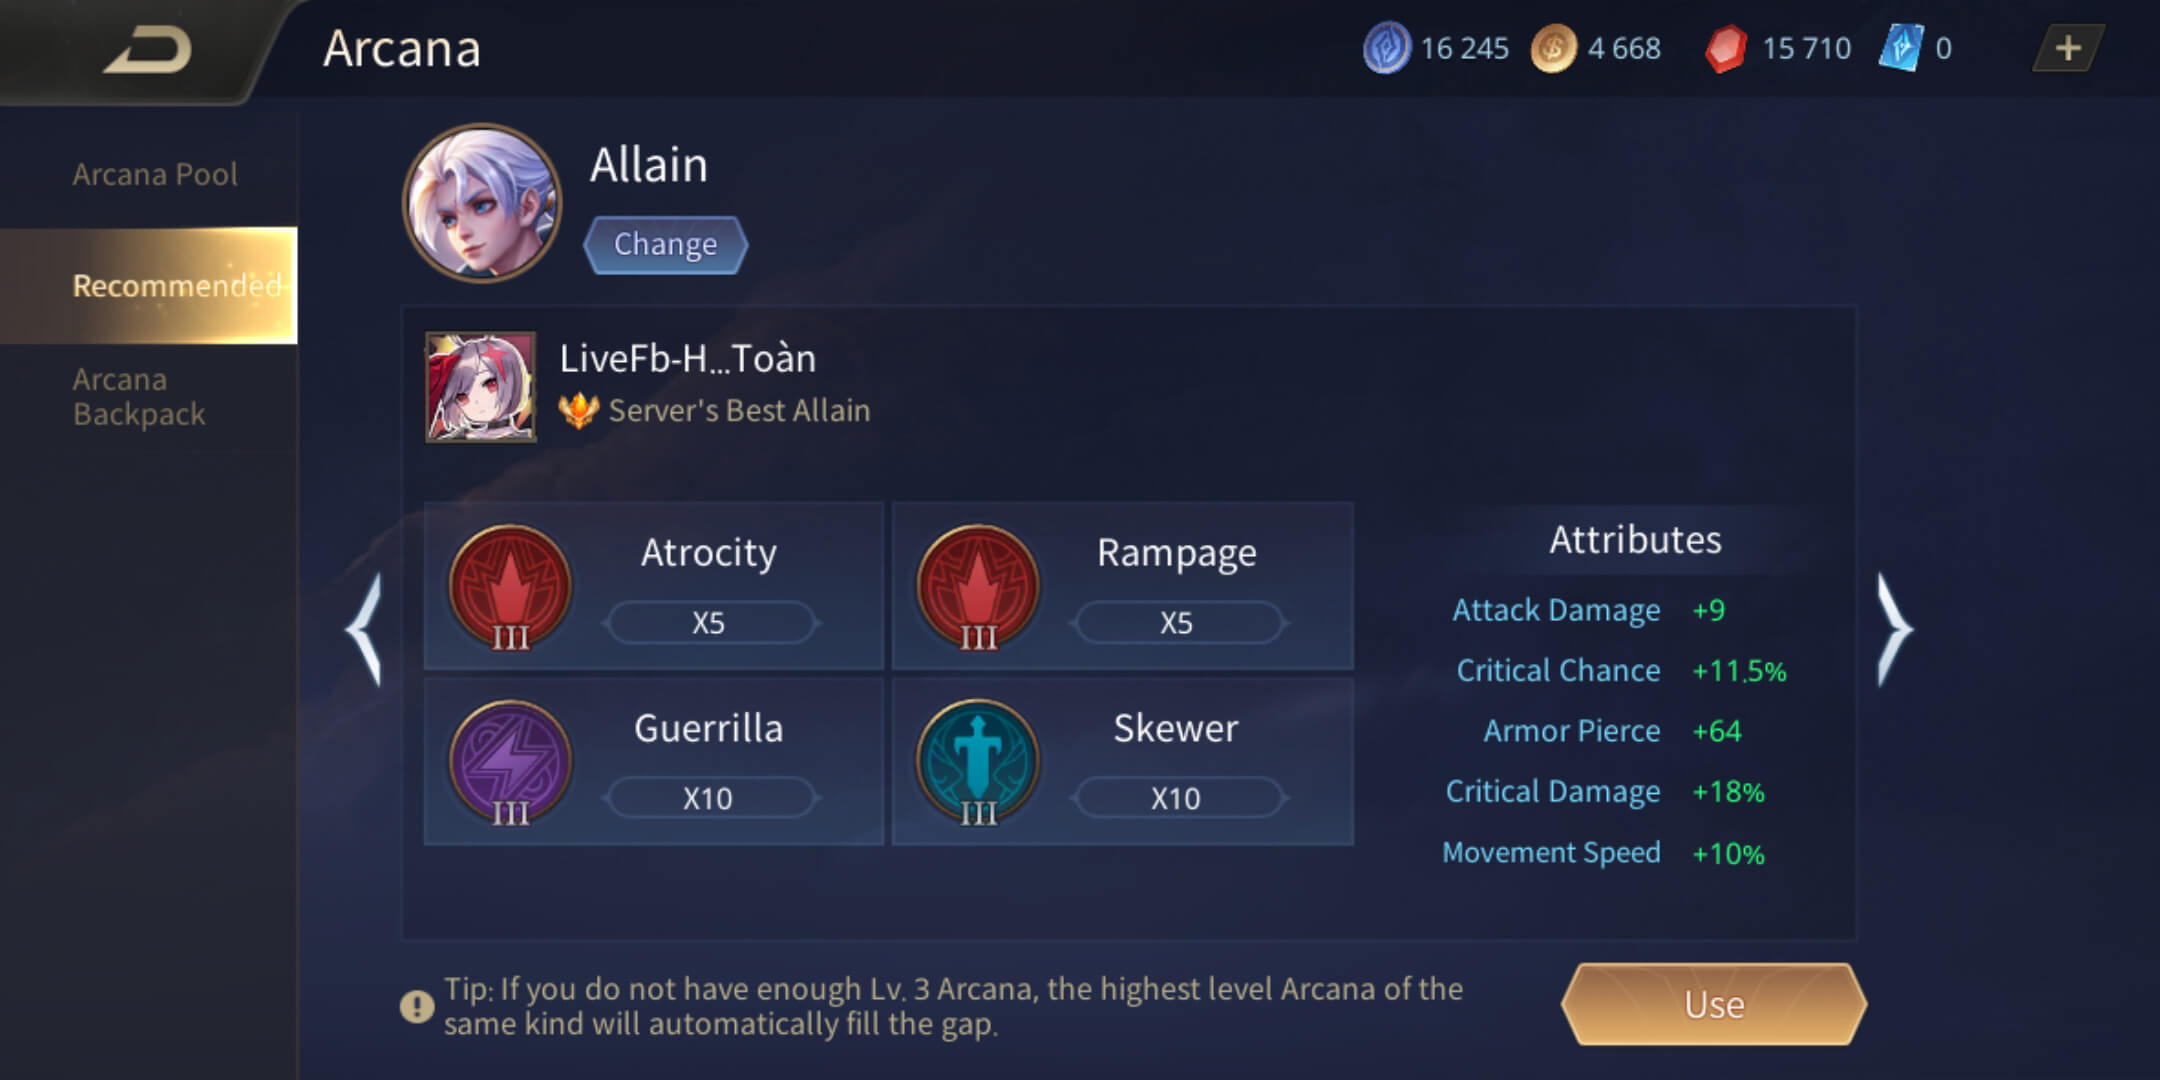 Allain Arcana Recommended